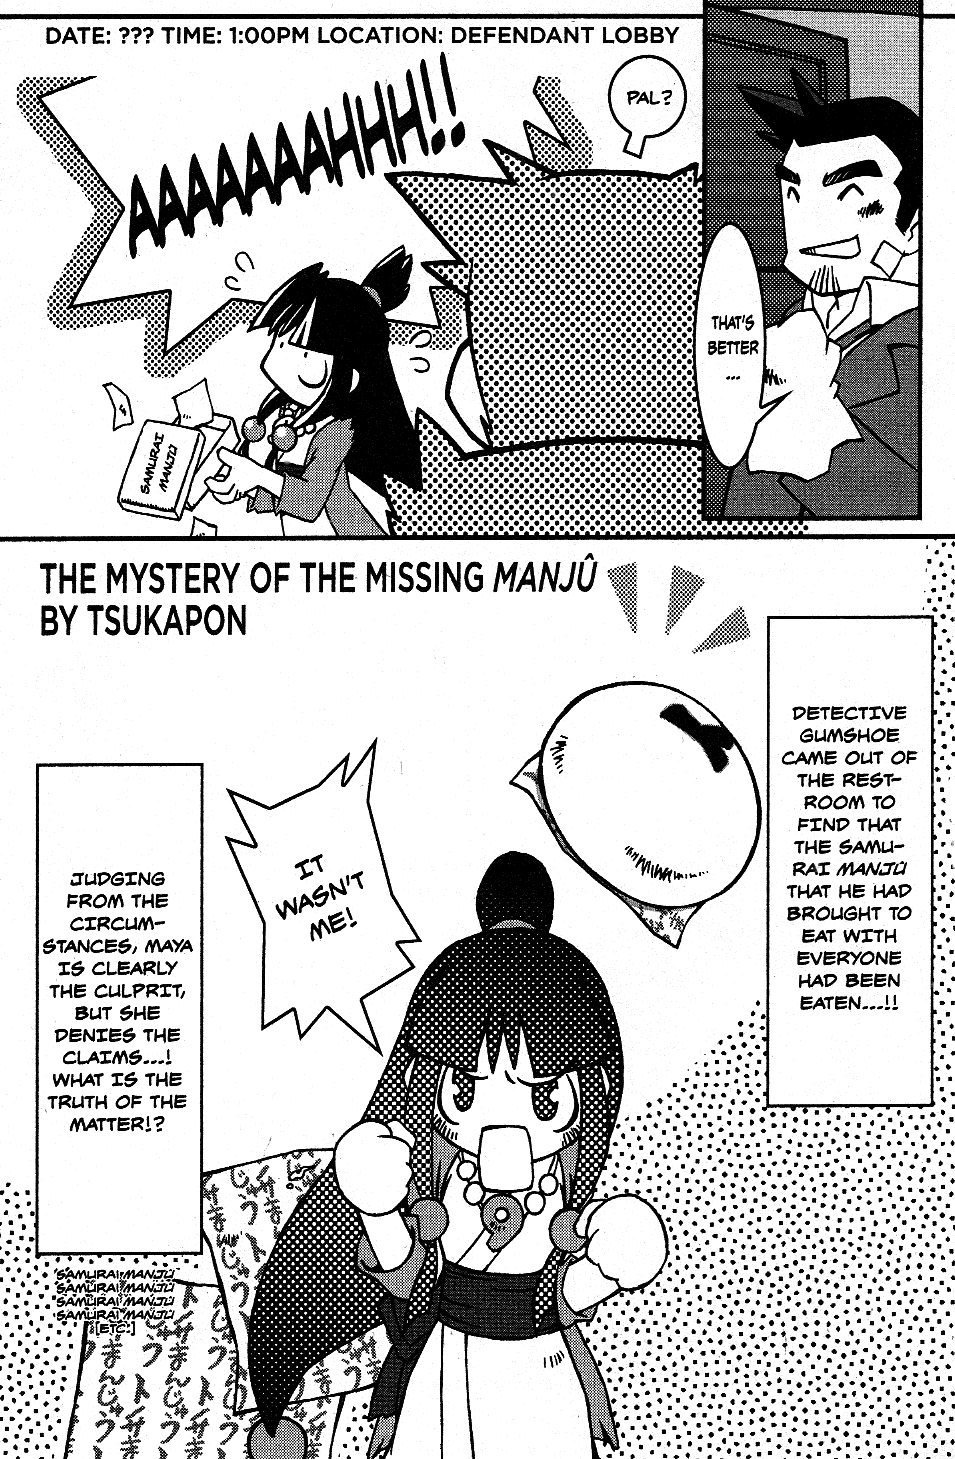 Phoenix Wright: Ace Attorney - Official Casebook Vol.1 Chapter 18: The Mystery Of The Missing Manjû - By Tsukapon - Picture 1